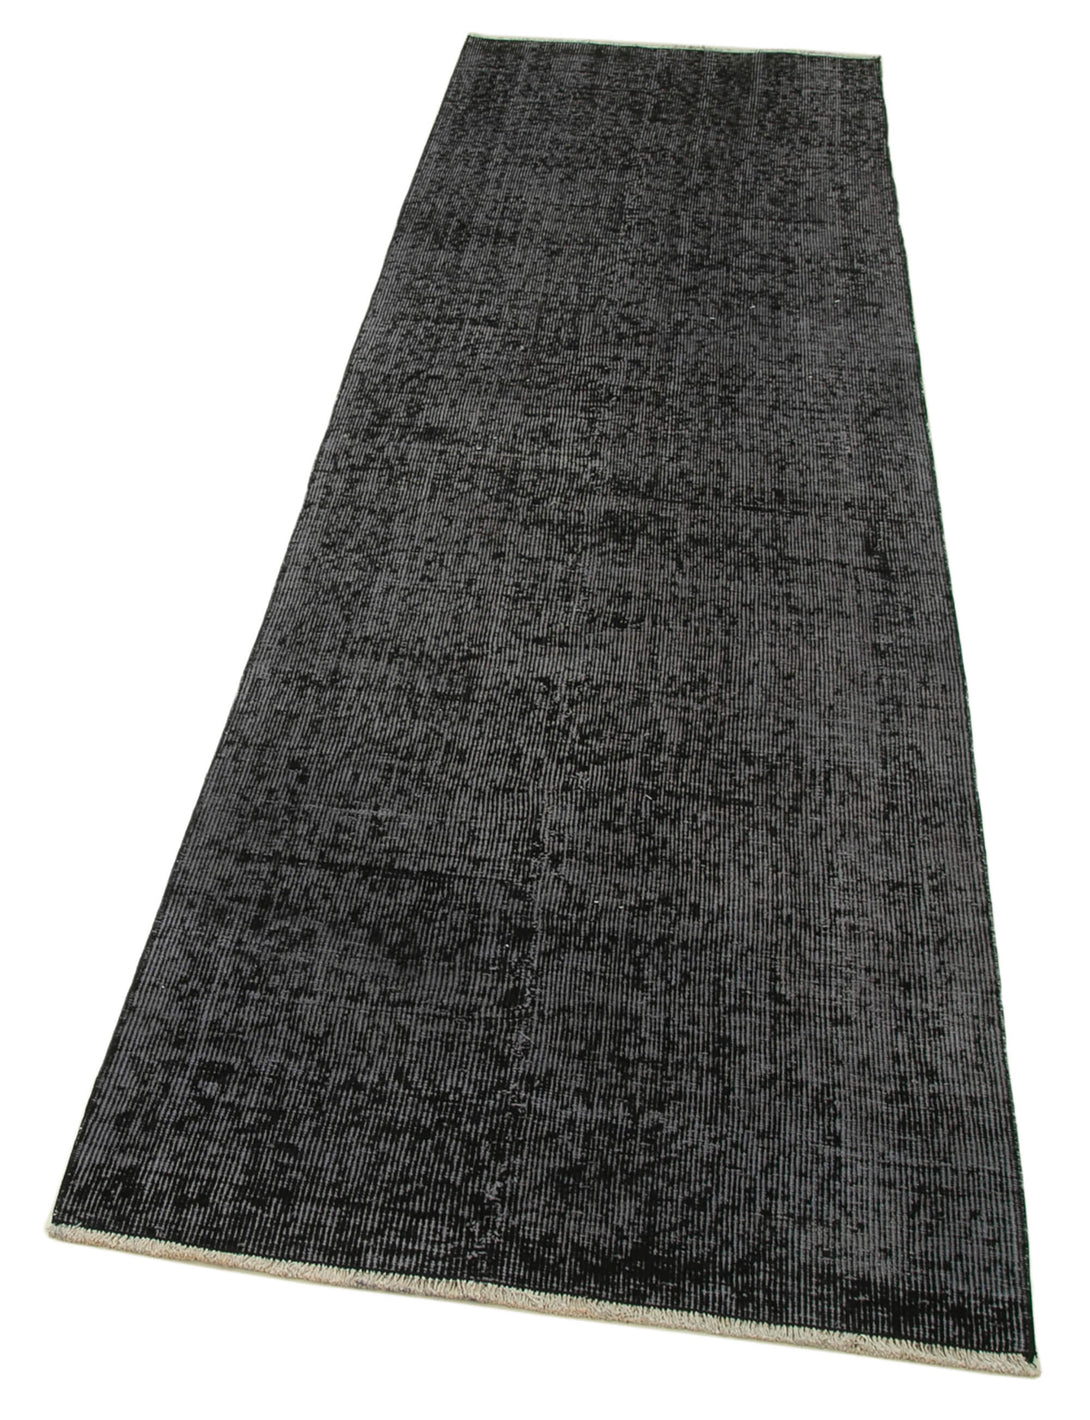 Handmade Overdyed Runner > Design# OL-AC-37140 > Size: 2'-7" x 8'-11", Carpet Culture Rugs, Handmade Rugs, NYC Rugs, New Rugs, Shop Rugs, Rug Store, Outlet Rugs, SoHo Rugs, Rugs in USA